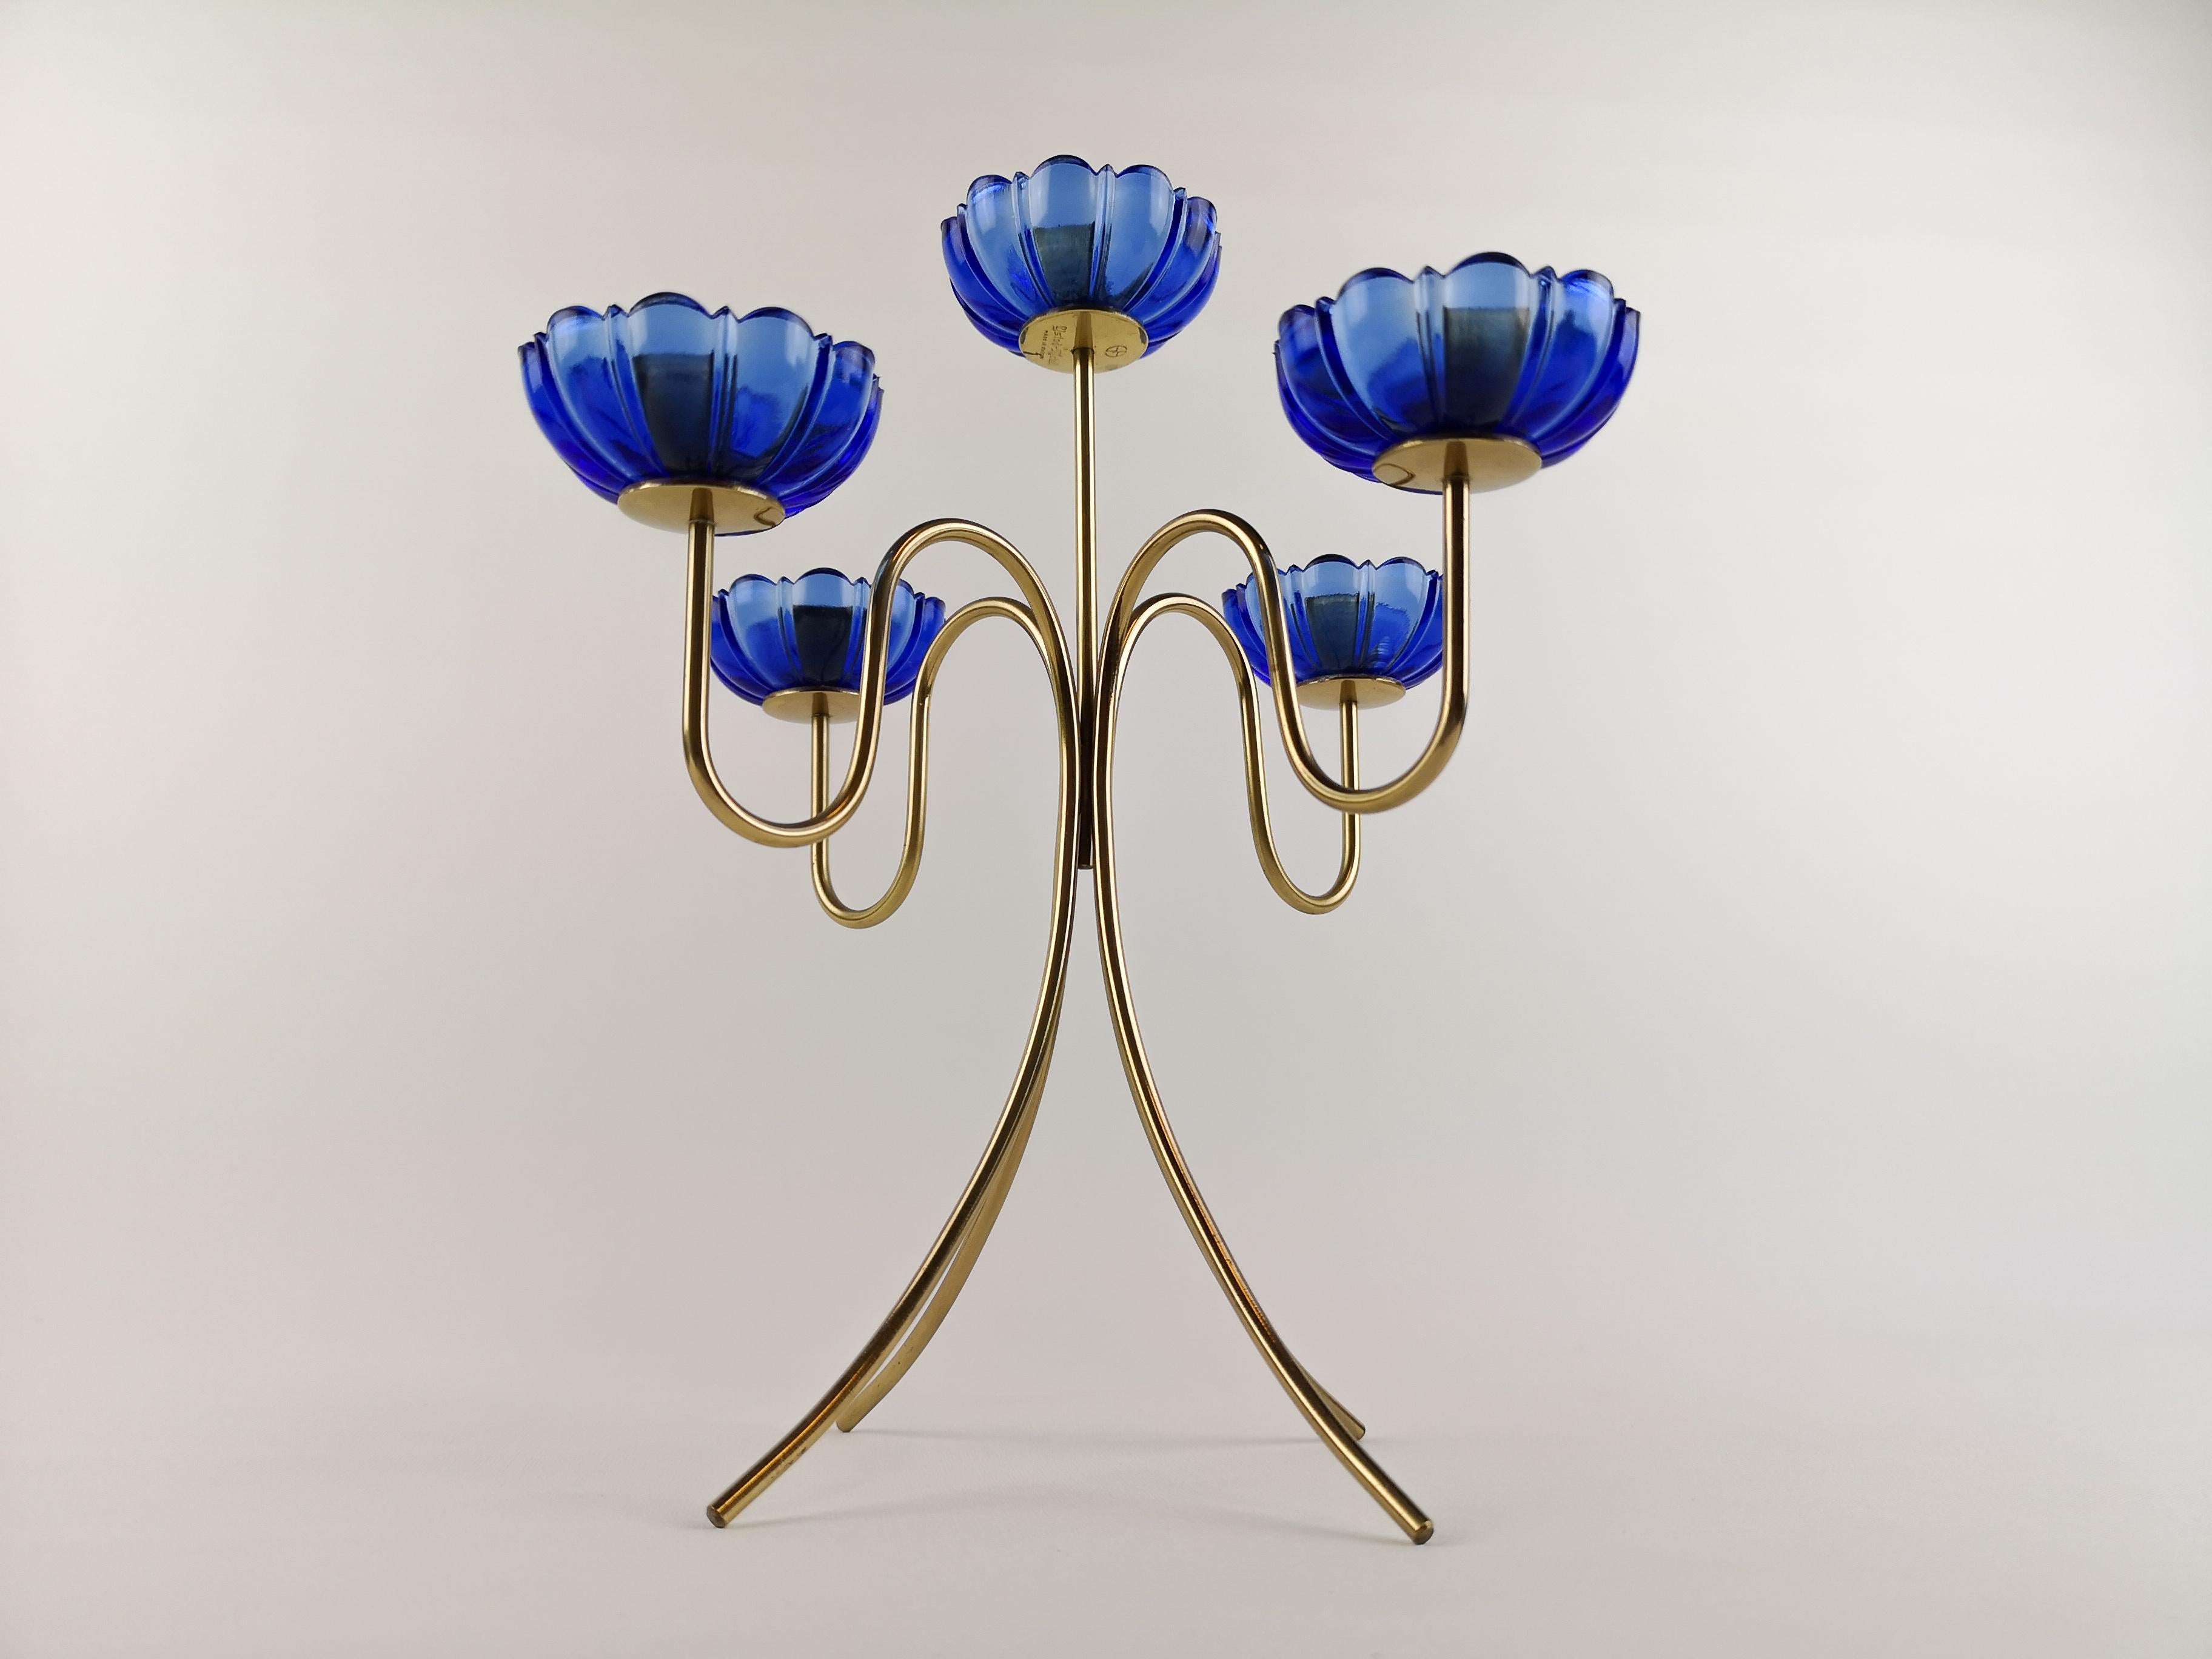 Brass Candelabra with Blue Glass by Gunnar Ander for Ystad-Metall, Sweden